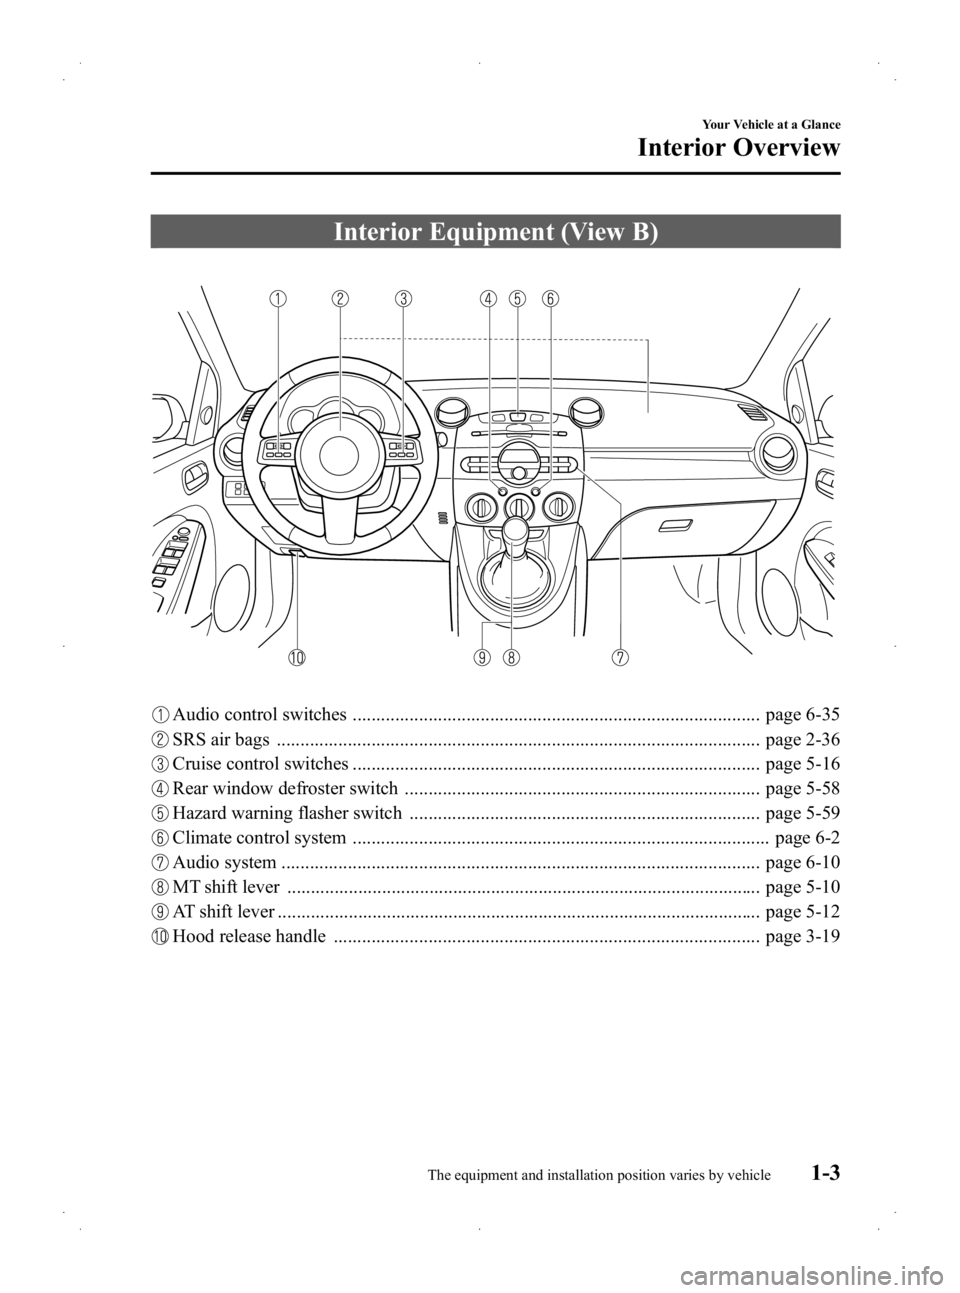 MAZDA MODEL 2 2013  Owners Manual Black plate (9,1)
Interior Equipment (View B)
Audio control switches ...................................................................................... page 6-35
SRS air bags .....................